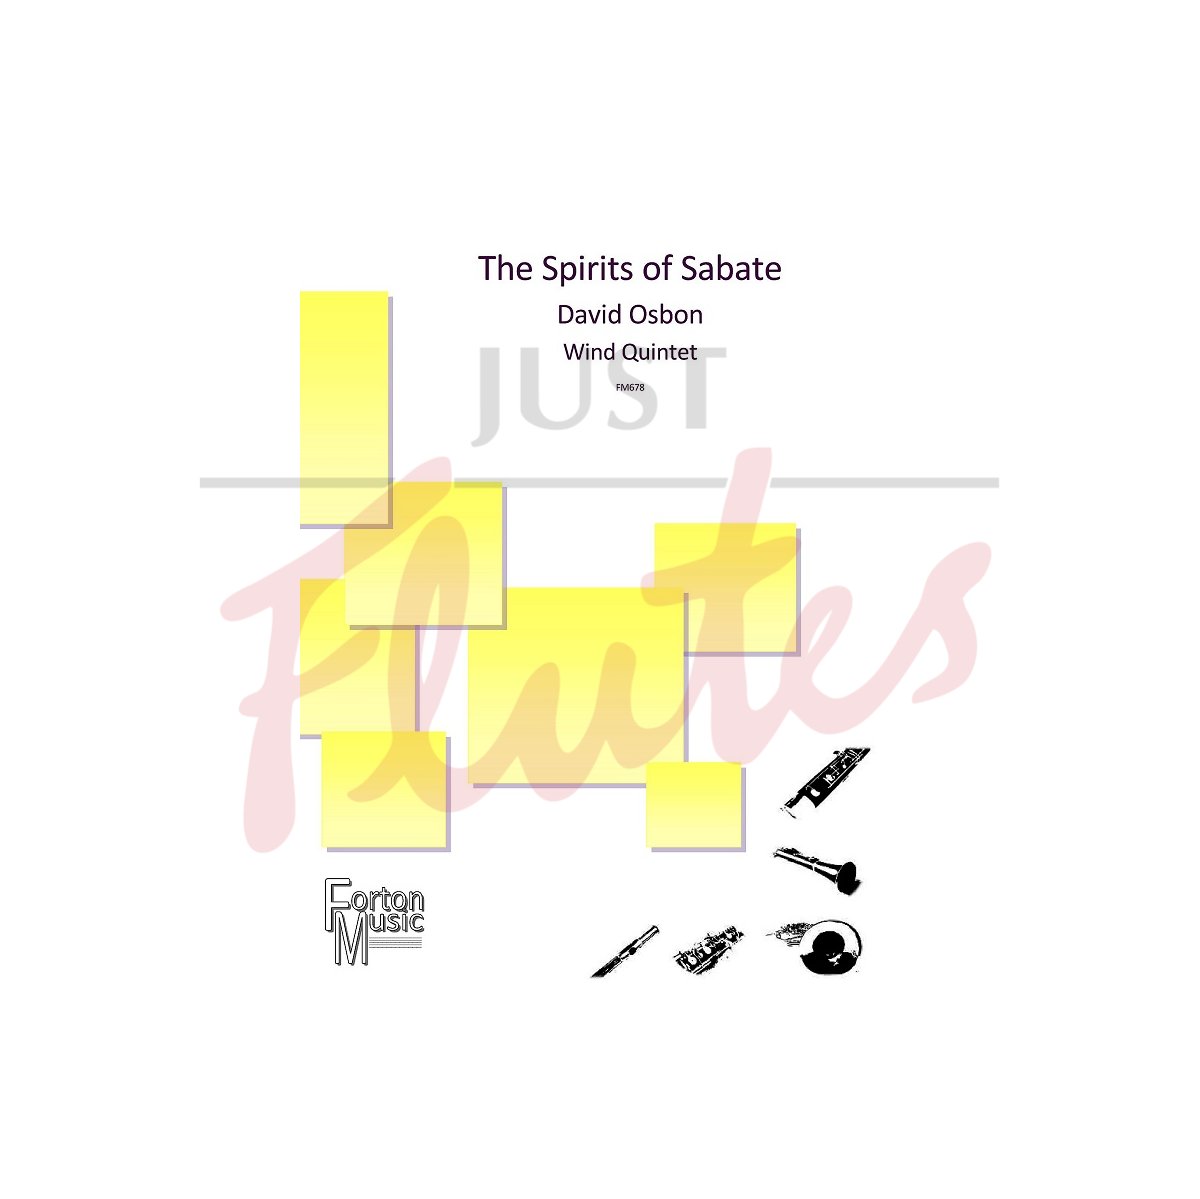 The Spirits of Sabate for Wind Quintet